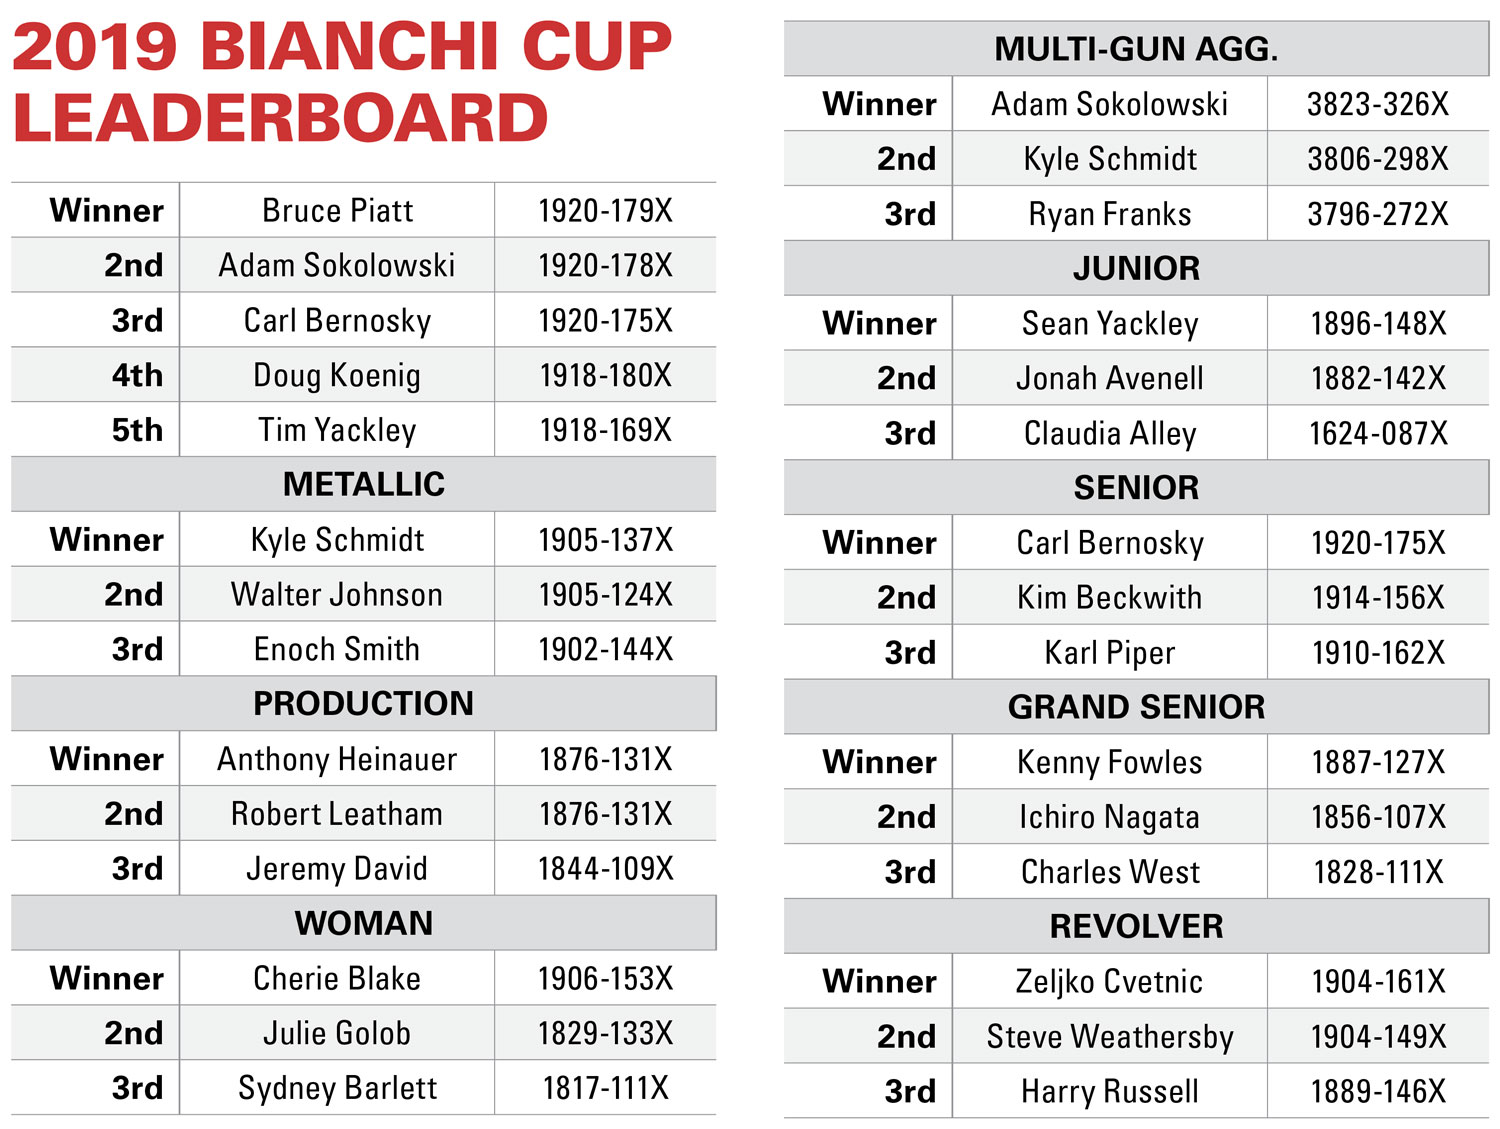 2019 NRA Bianchi Cup Leaderboard